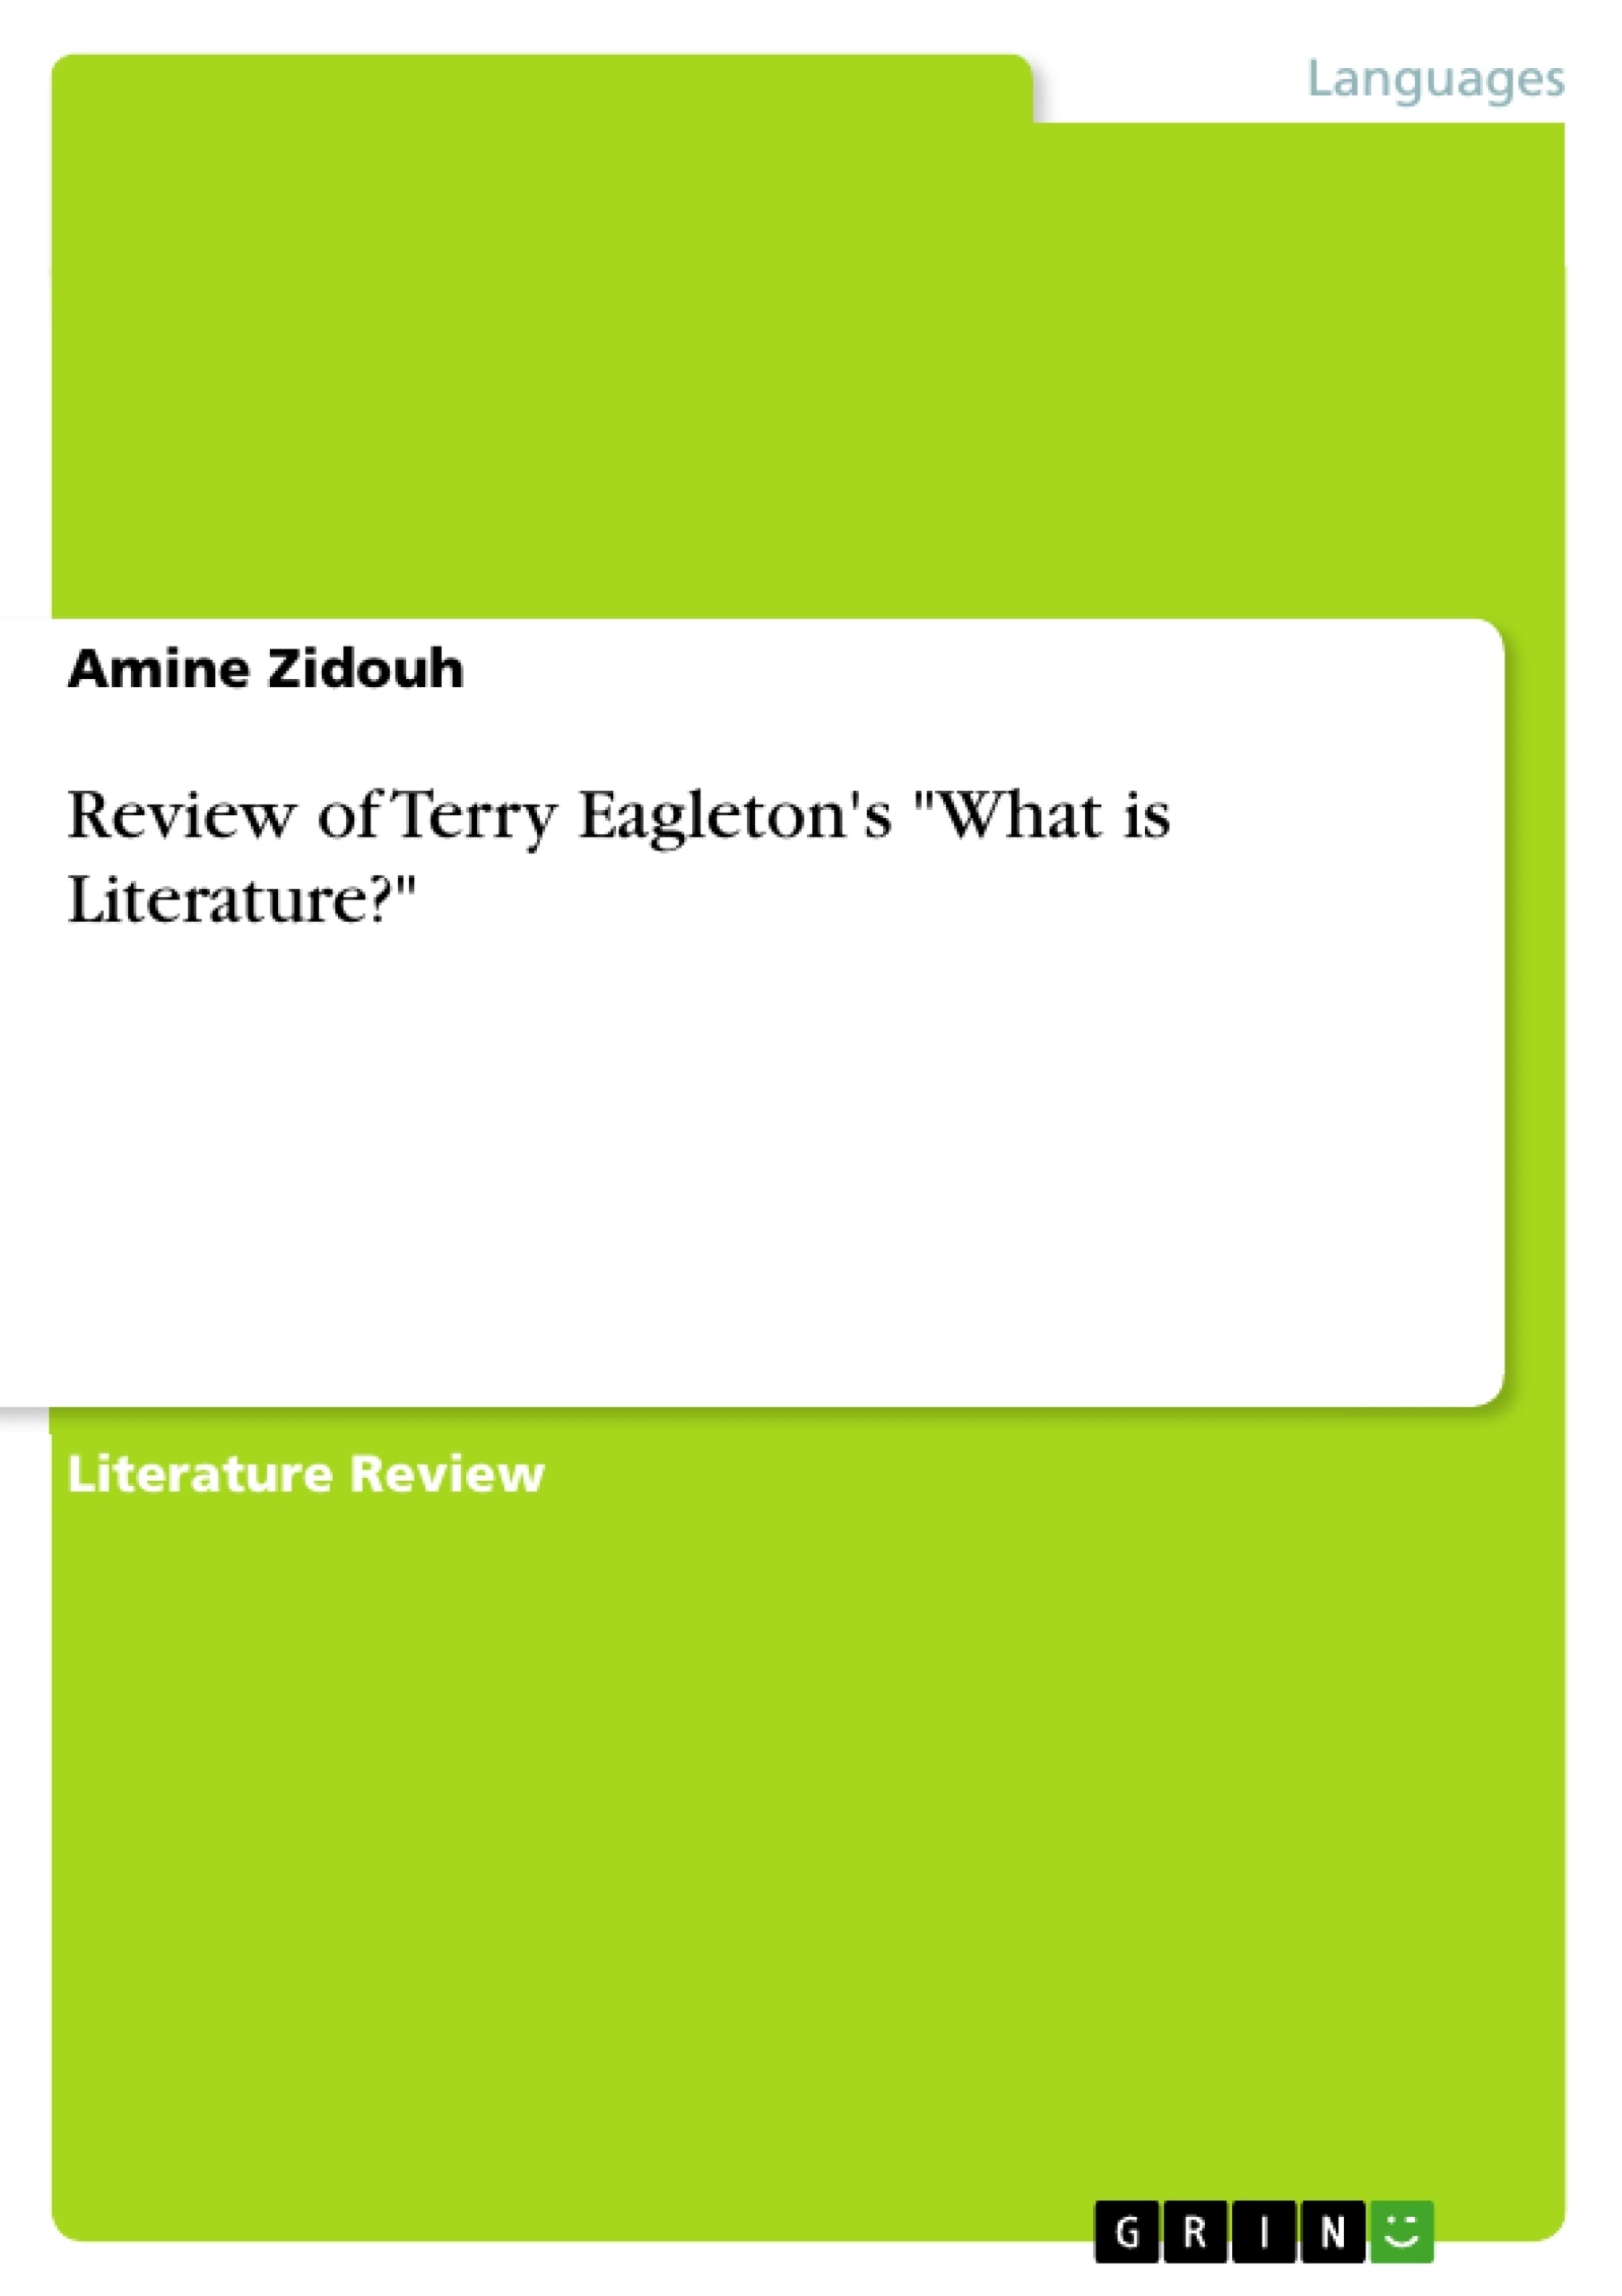 Titre: Review of Terry Eagleton's "What is Literature?"